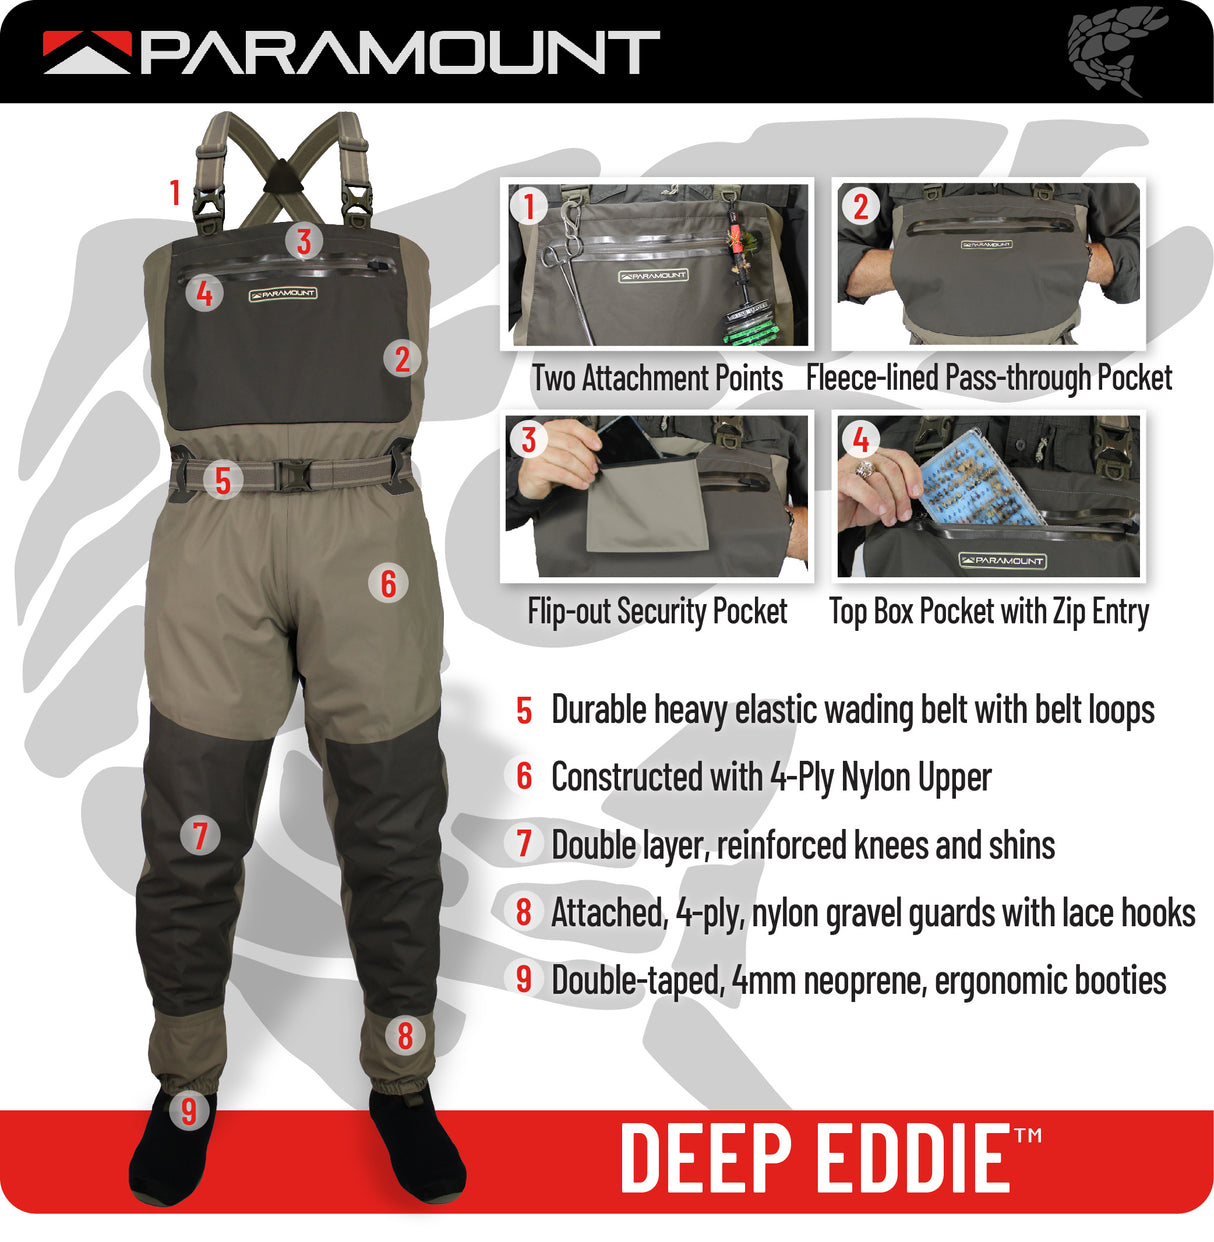 BIG EDDY Stout Breathable Stockingfoot Chest Waders